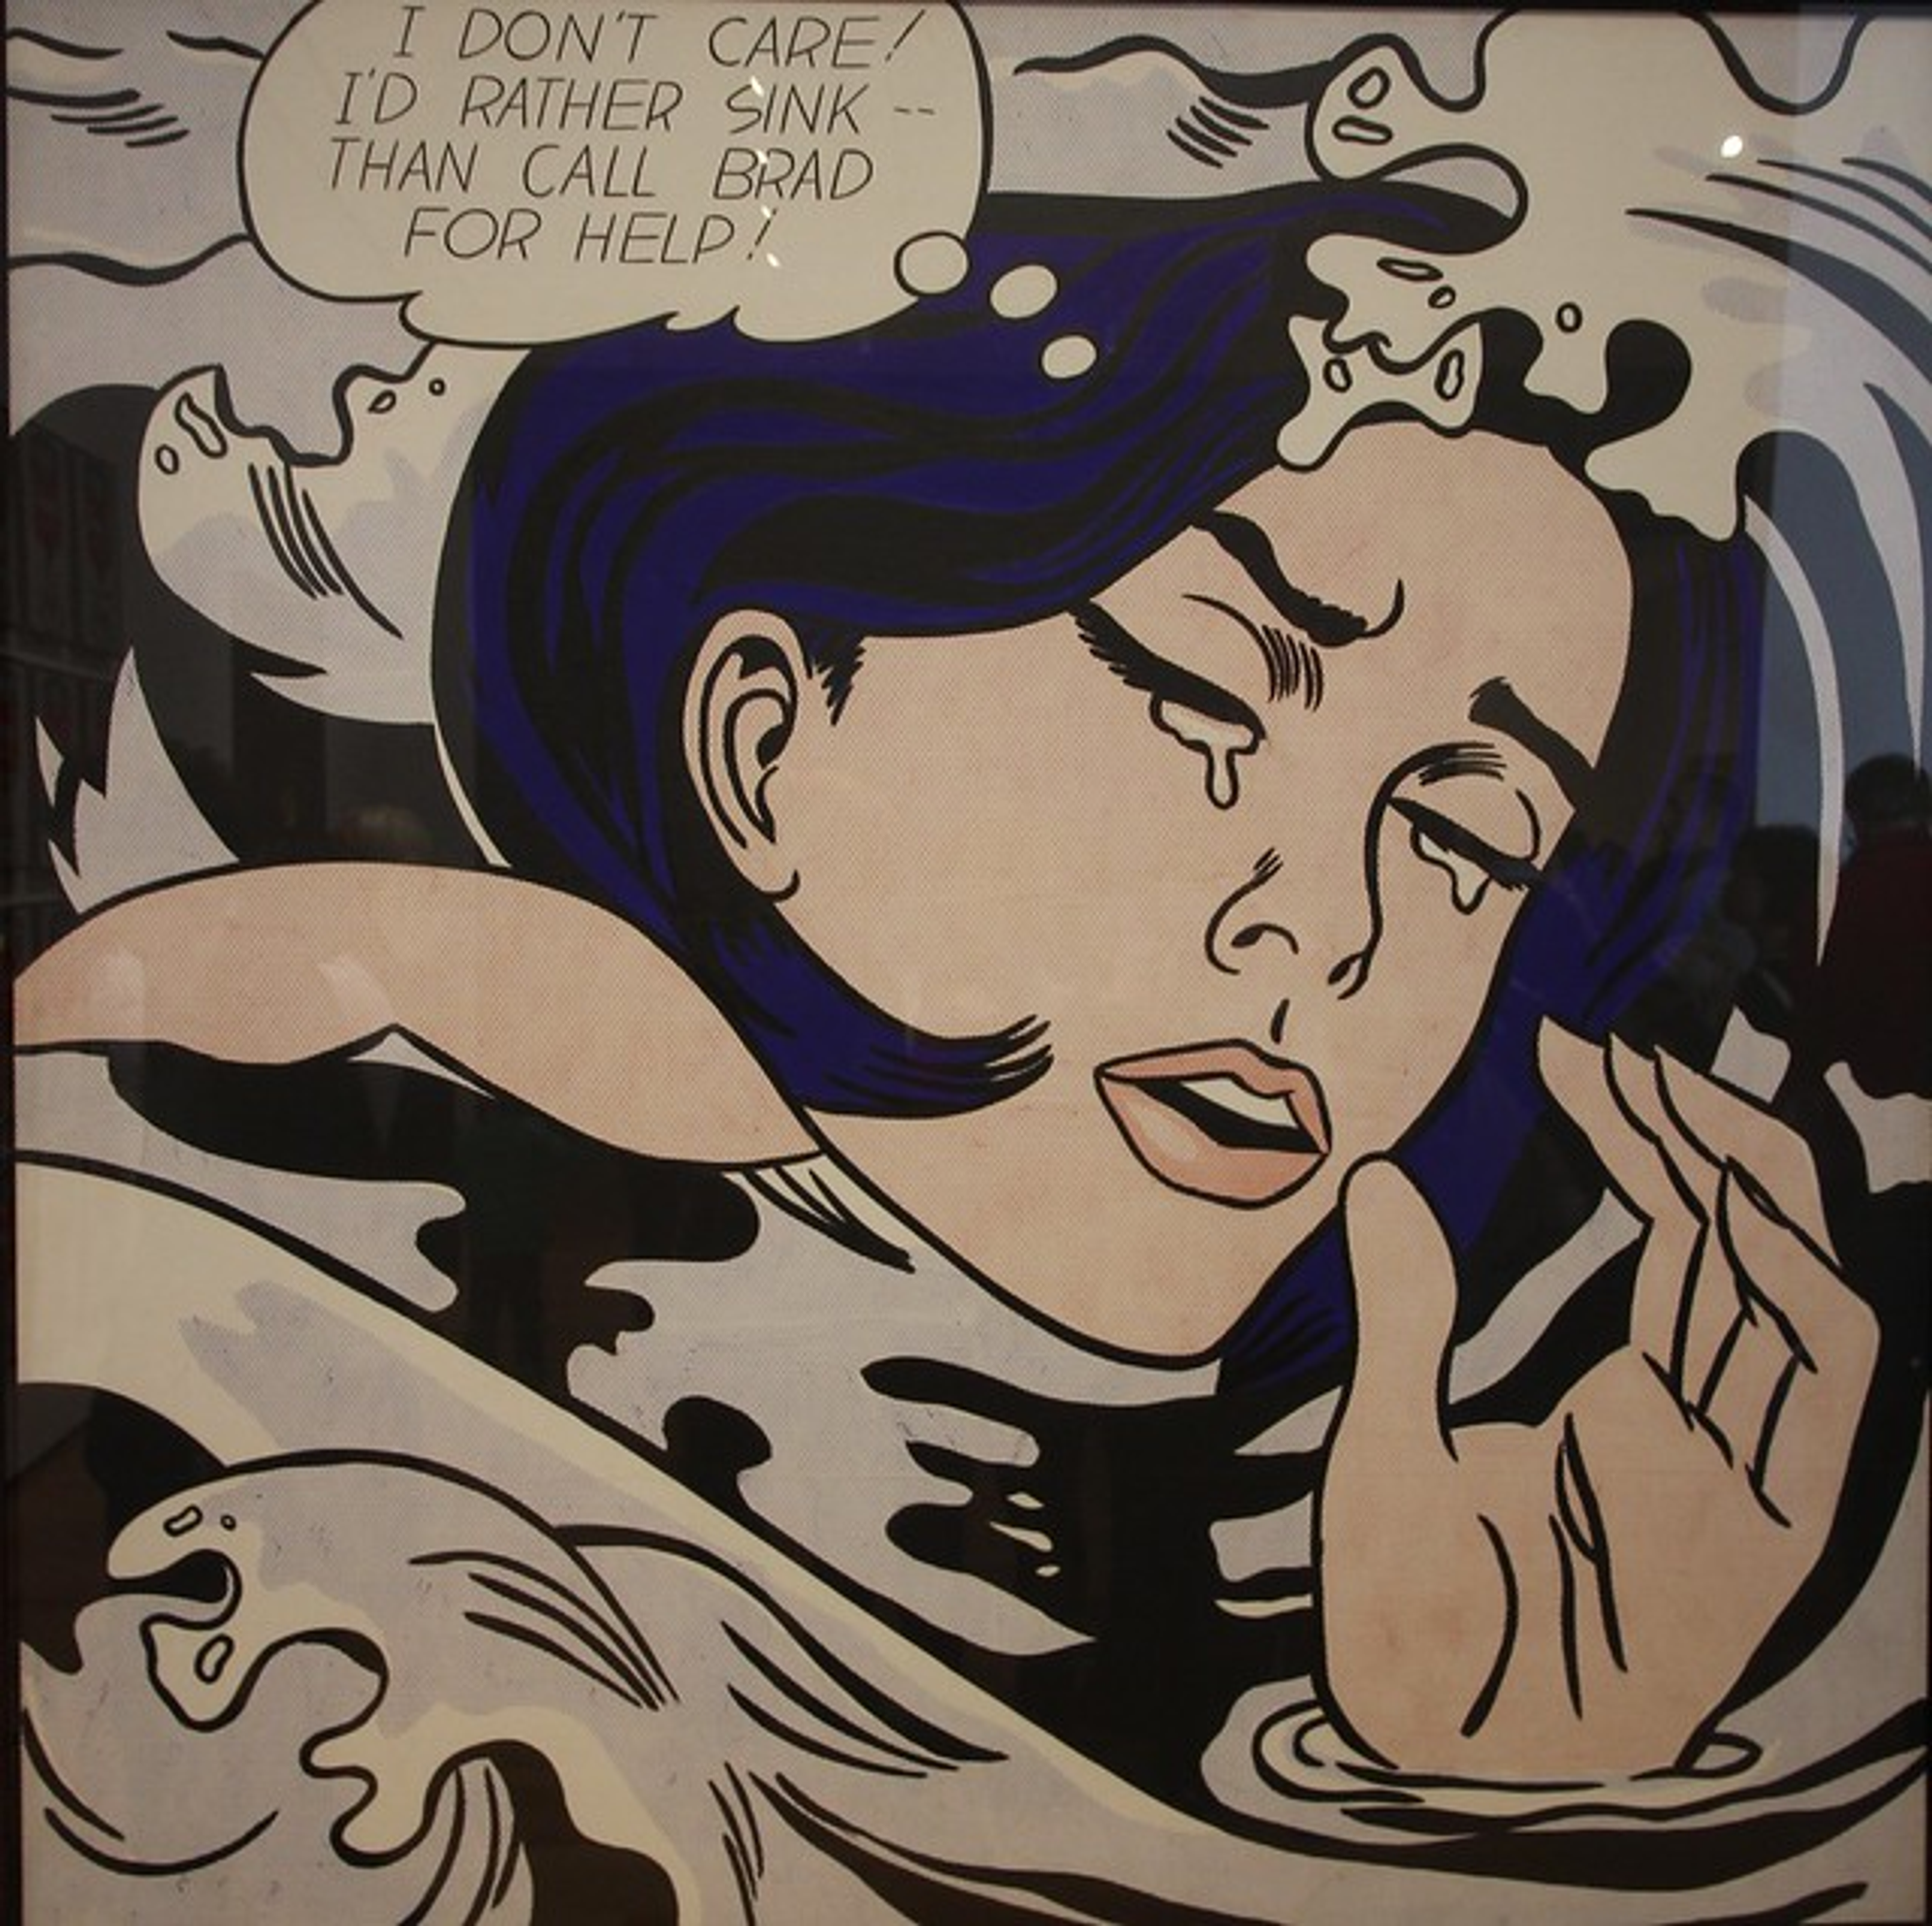 This painting shows a teary-eyed woman on a turbulent sea. She is emotionally distressed, seemingly from a romance. Using the conventions of comic book art, a thought bubble reads: "I Don't Care! I'd Rather Sink — Than Call Brad For Help!" This narrative element highlights the clichéd melodrama, while its graphics — including Ben-Day dots that echo the effect of the printing process — reiterate Lichtenstein's theme of painterly work that imitates mechanised reproduction. 